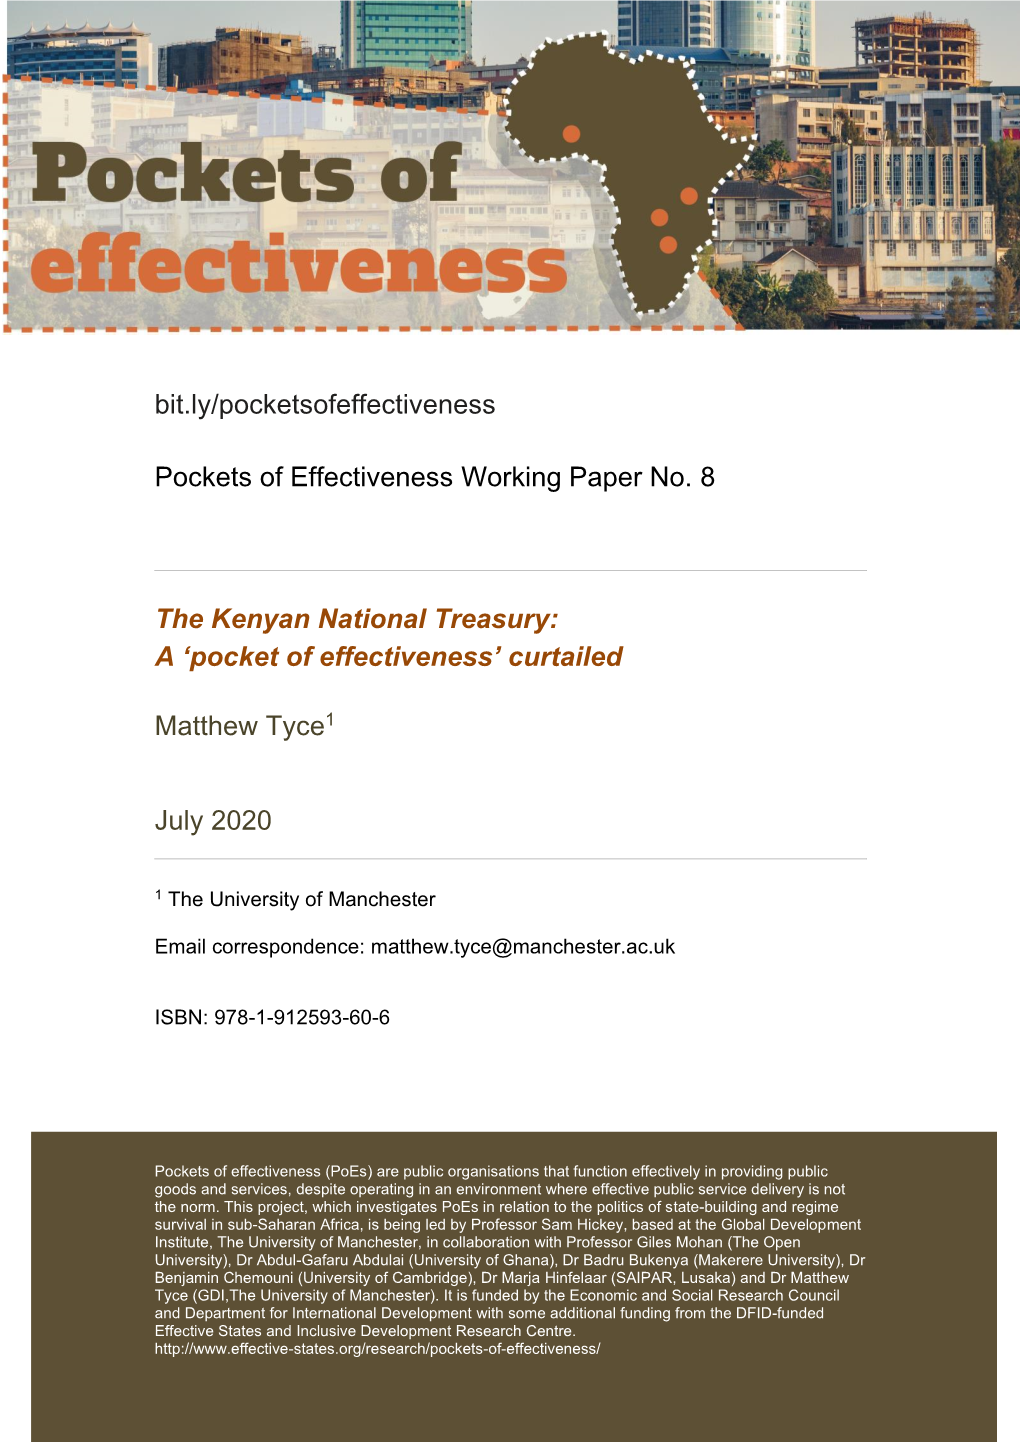 The Kenyan National Treasury: a ‘Pocket of Effectiveness’ Curtailed